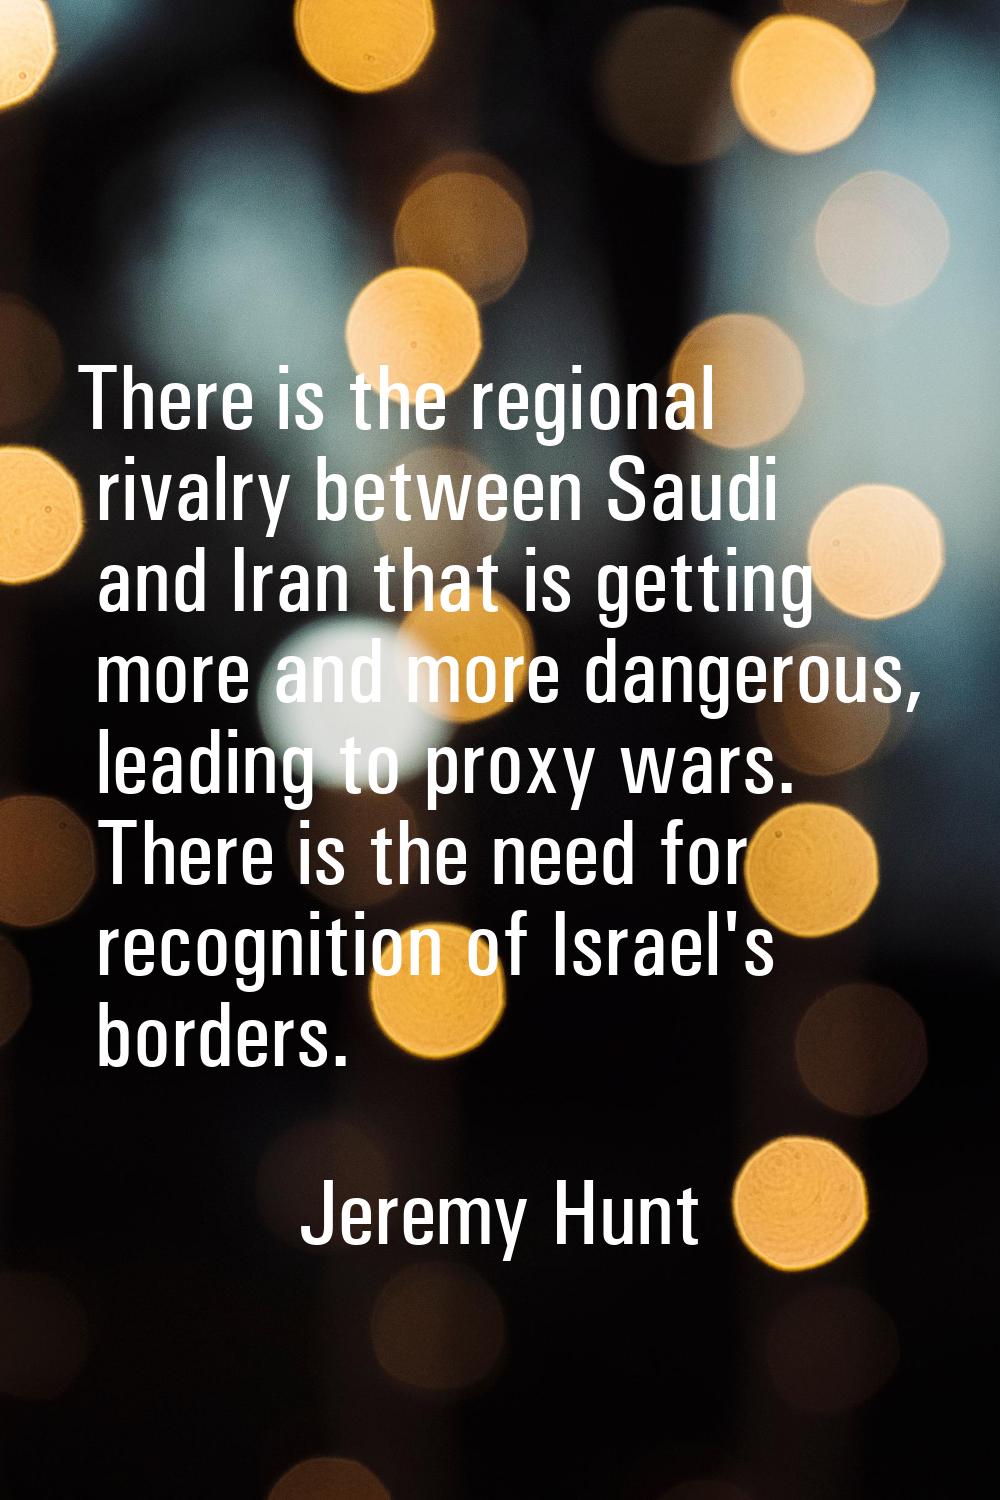 There is the regional rivalry between Saudi and Iran that is getting more and more dangerous, leadi